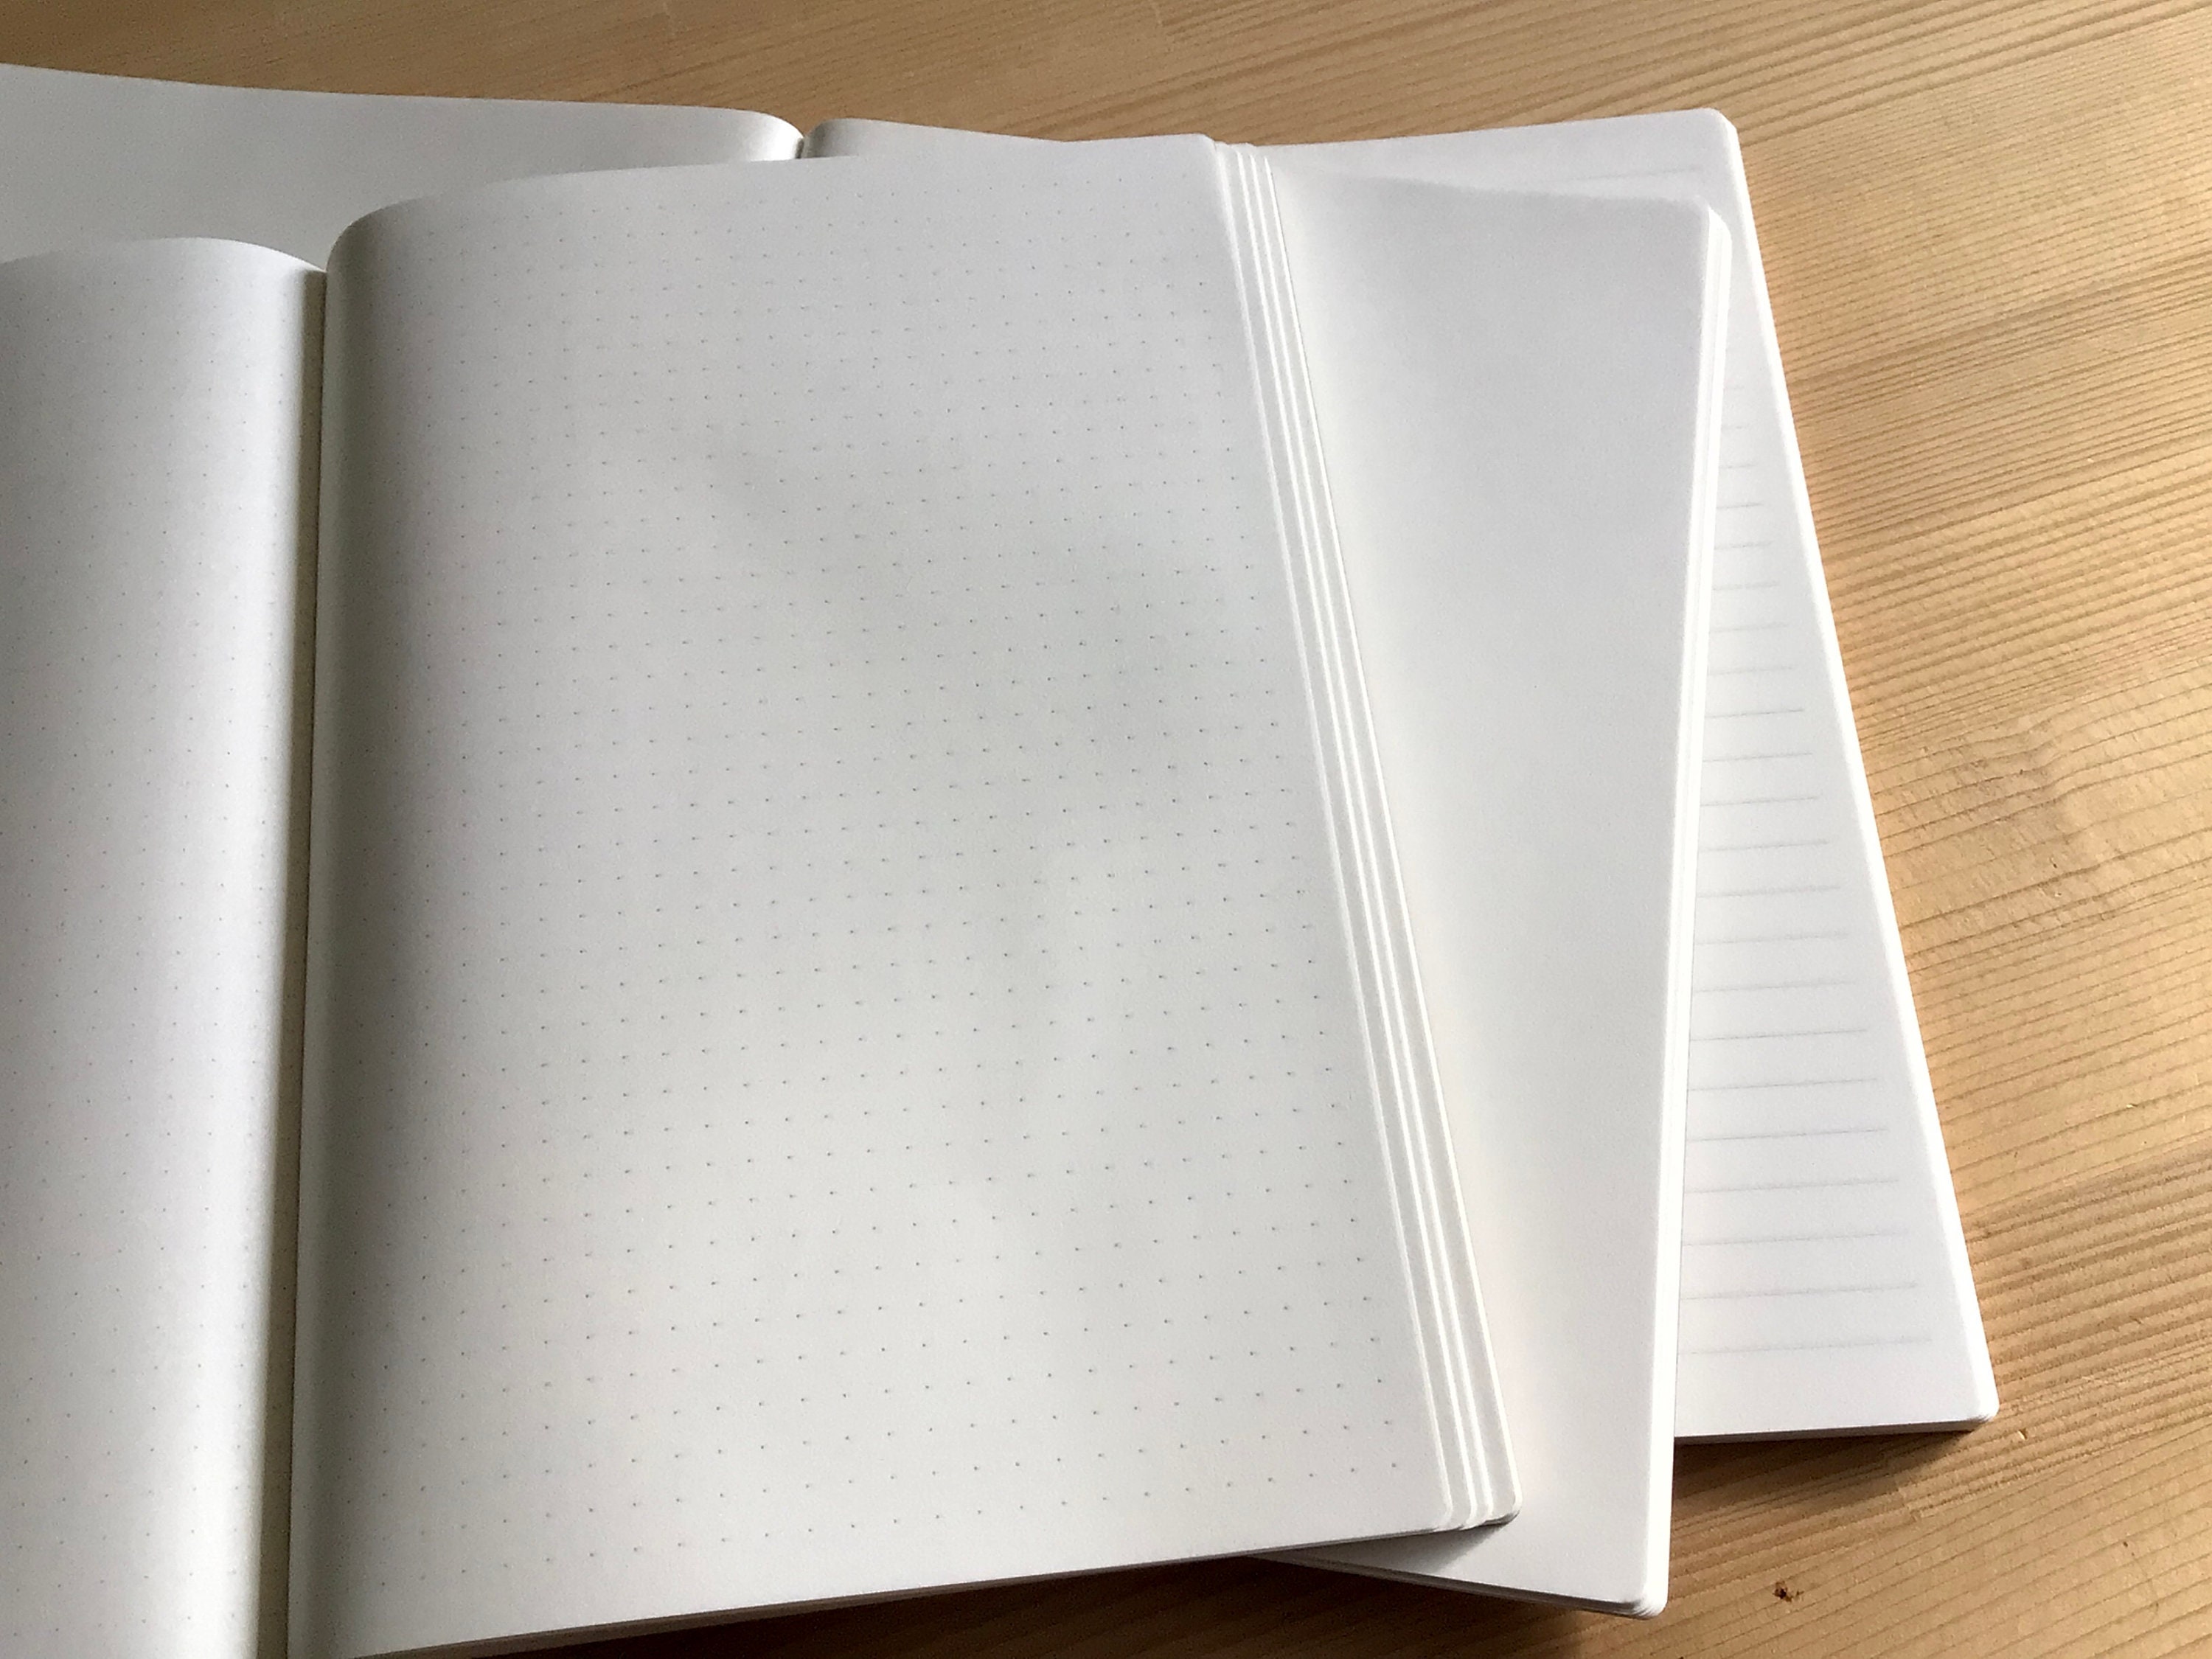 Notepad made with Onion Skin Paper